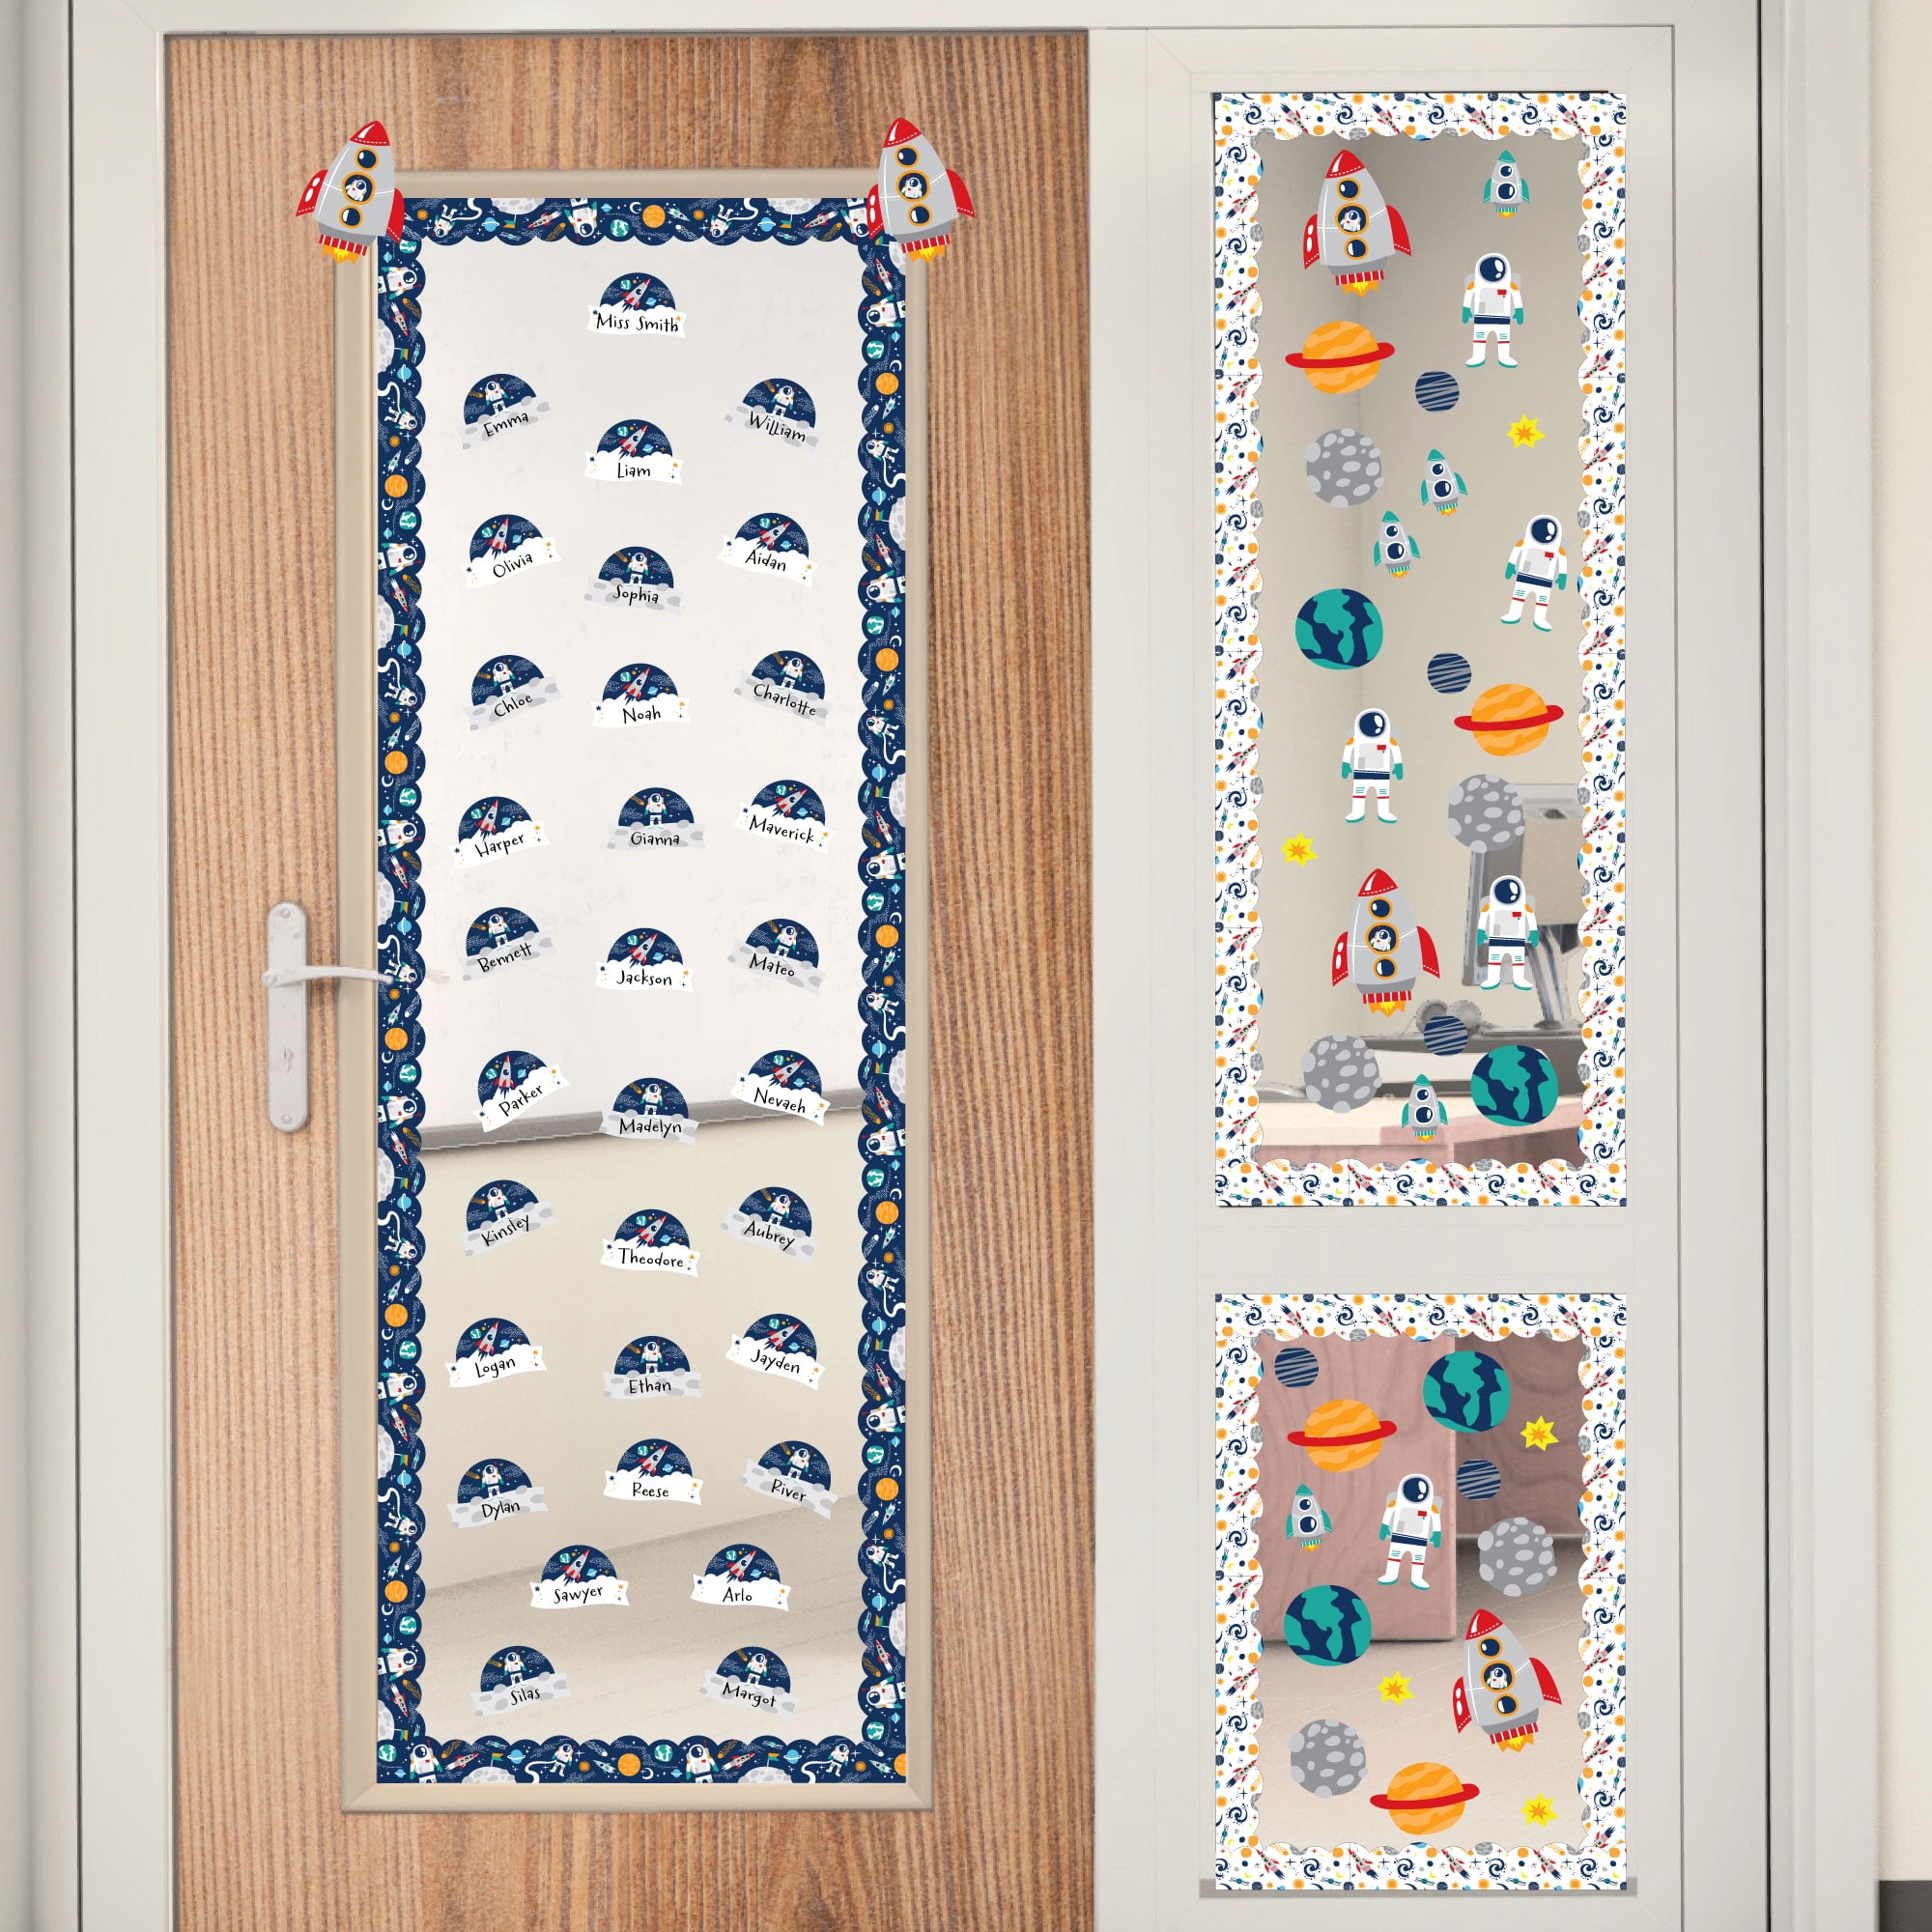 Harloon 41 Pcs Space Themed Classroom Bulletin Board Sets Today is A  Great